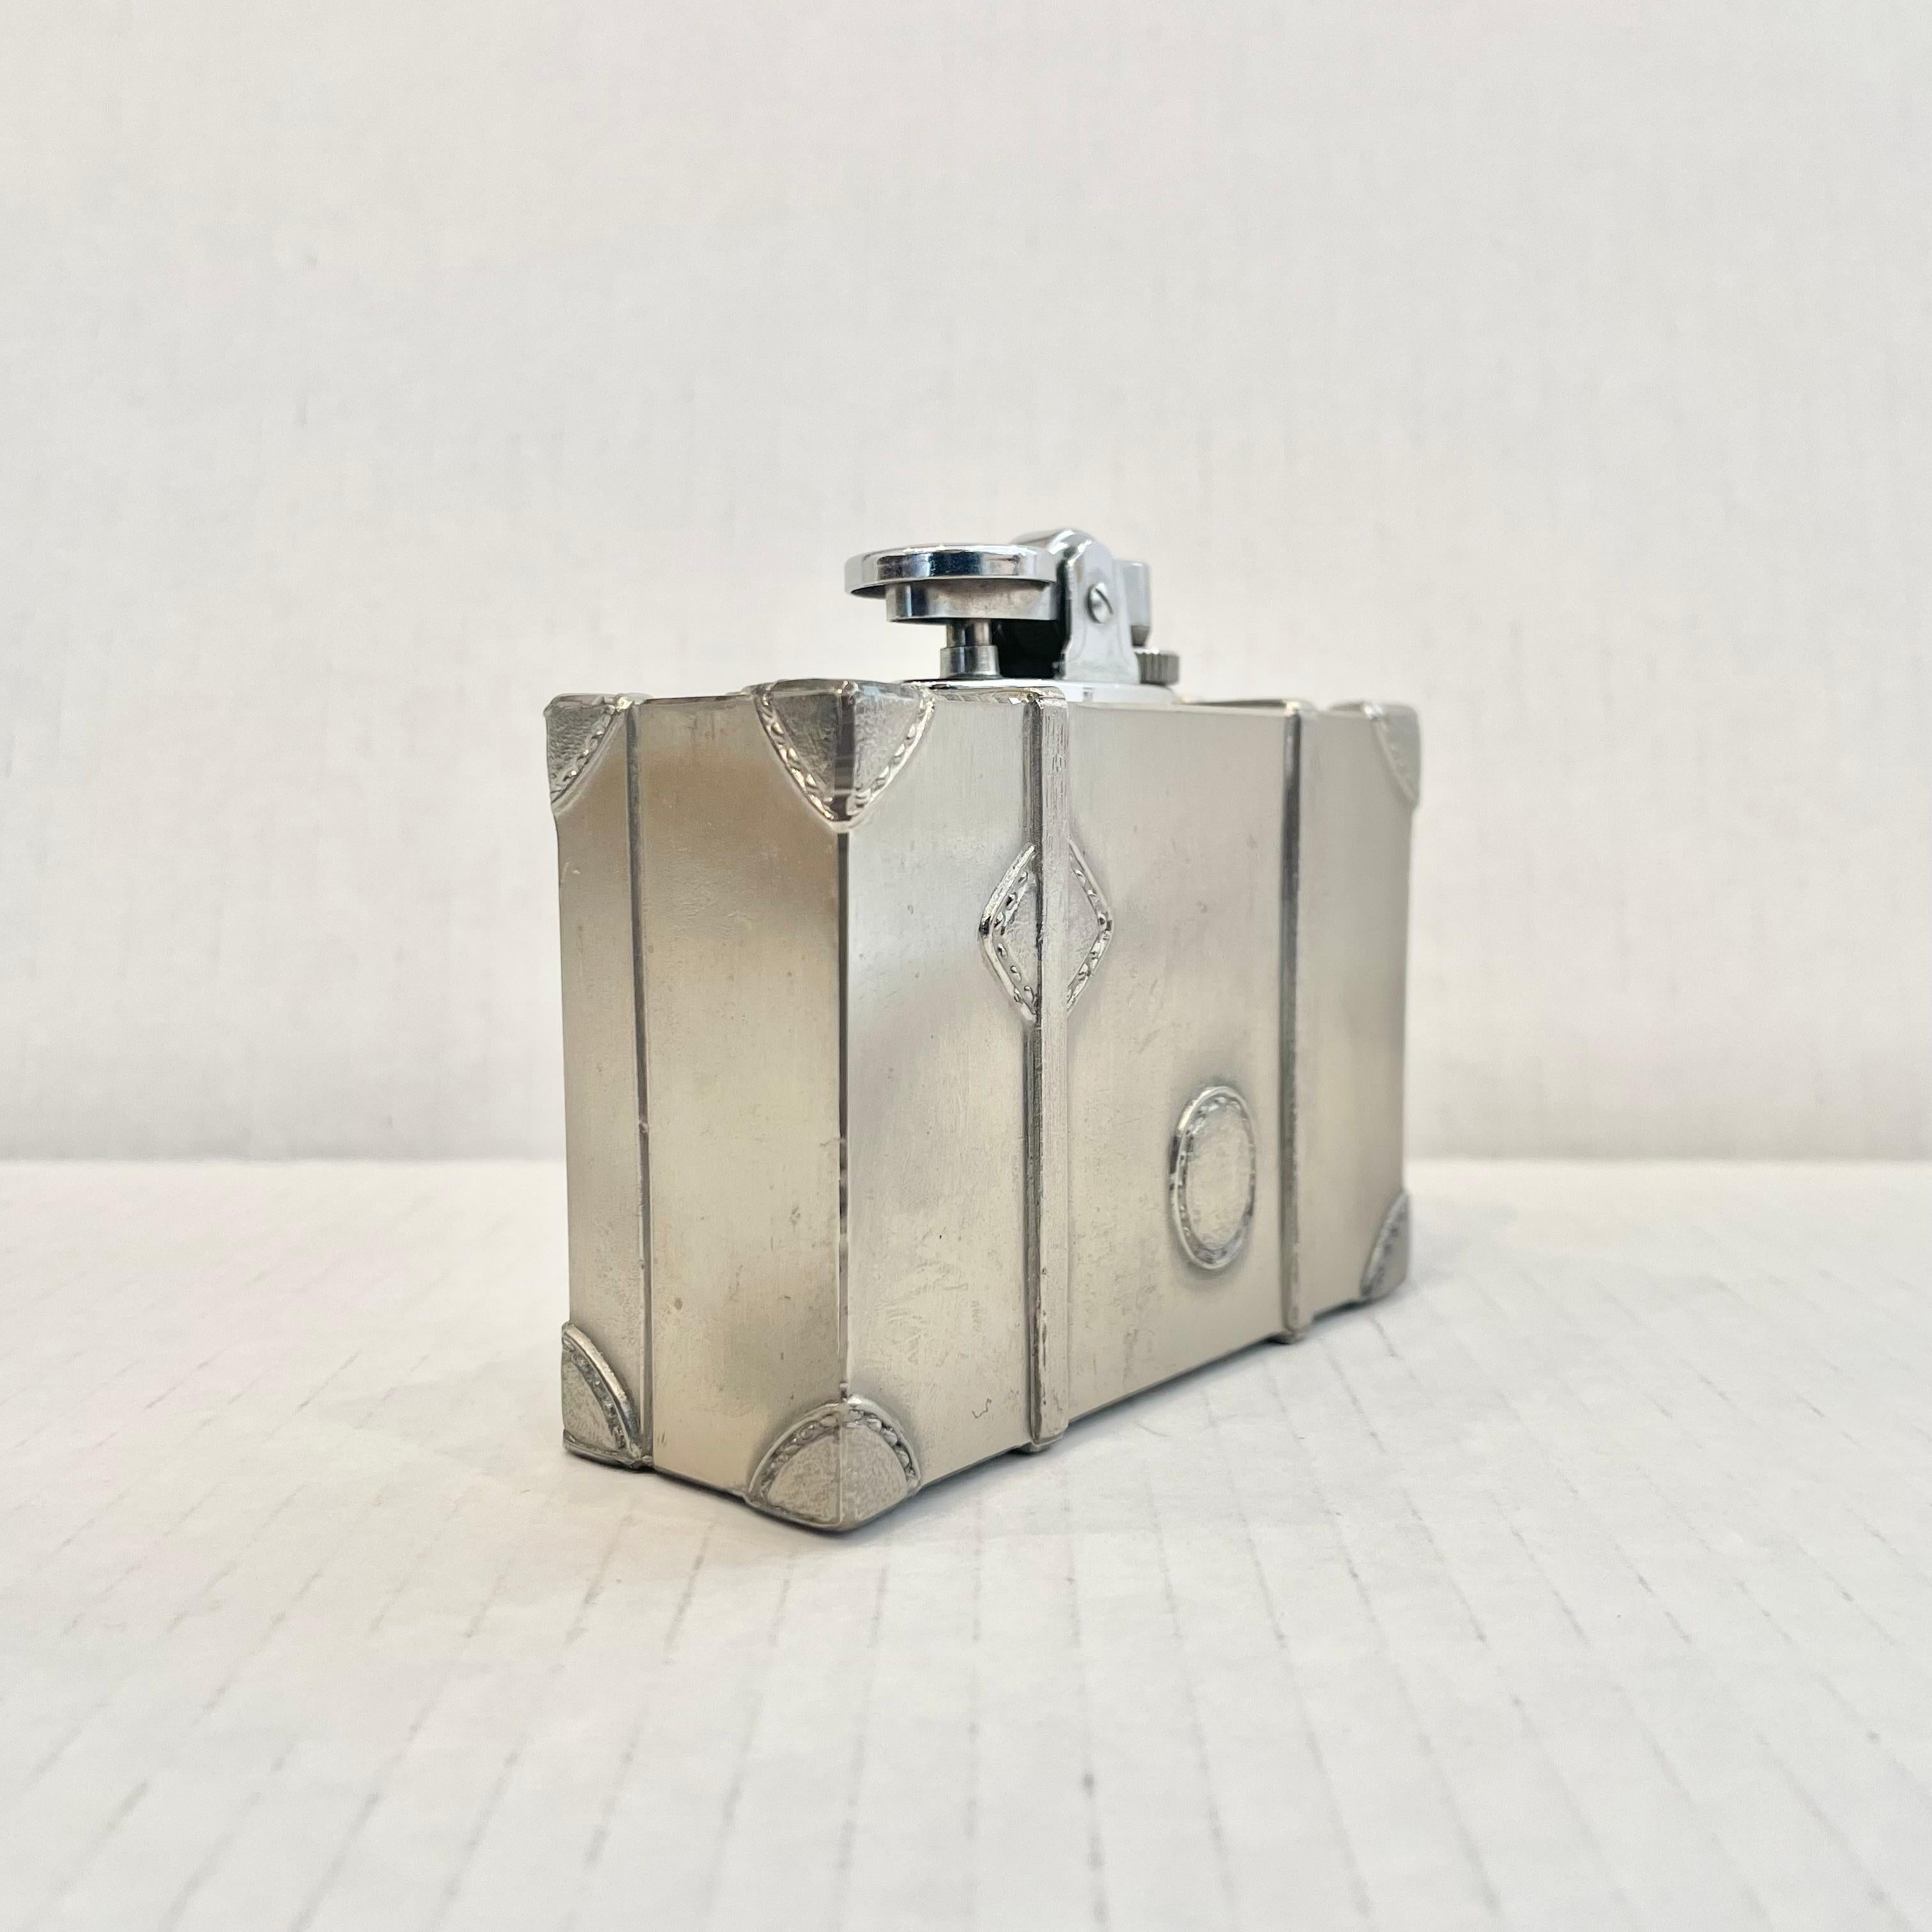 Cool vintage table lighter in the shape of a luggage trunk with straps and bag tags. Made completely of metal with a hollow body. Light patina giving this piece a classic silver color. Cool tobacco accessory and conversation piece. Working lighter.